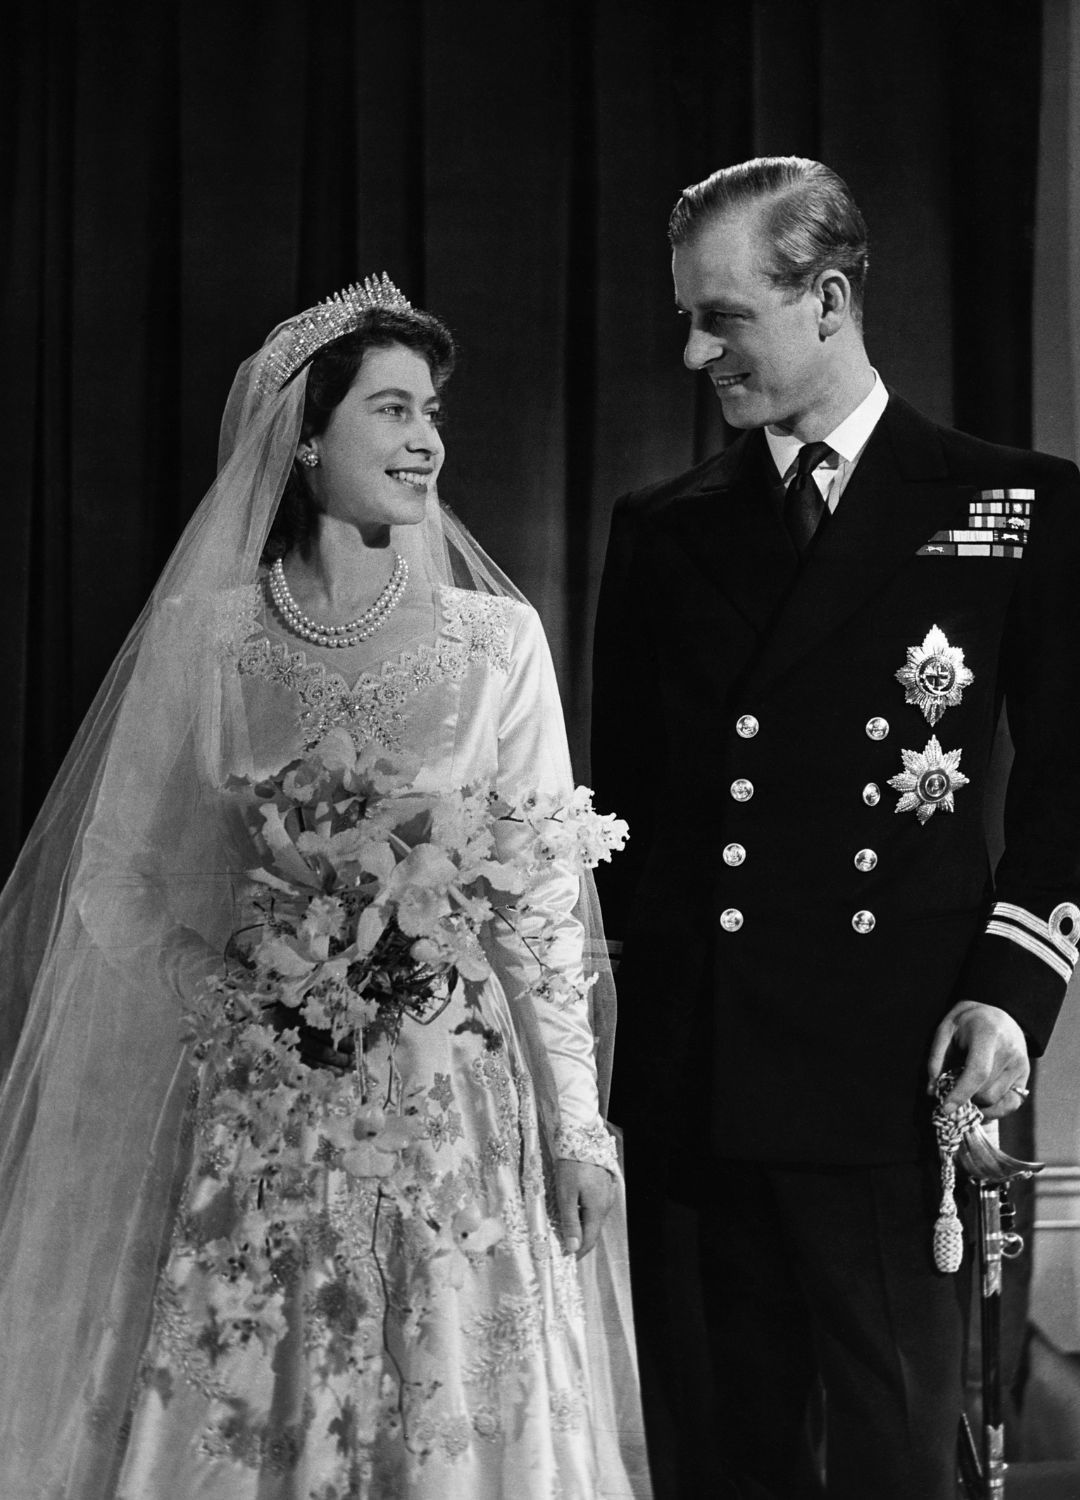 <p>                     Posing for perhaps one of the most iconic wedding pictures ever taken (and one of the most romantic royal moments!), the then Princess Elizabeth wore the Queen Mary Fringe tiara as a 'something borrowed' token. A token, which she had been lent from her mother Queen Elizabeth, that immediately snapped before her 1947 wedding and had to be emergency repaired by the on-hand court jeweller.                   </p>